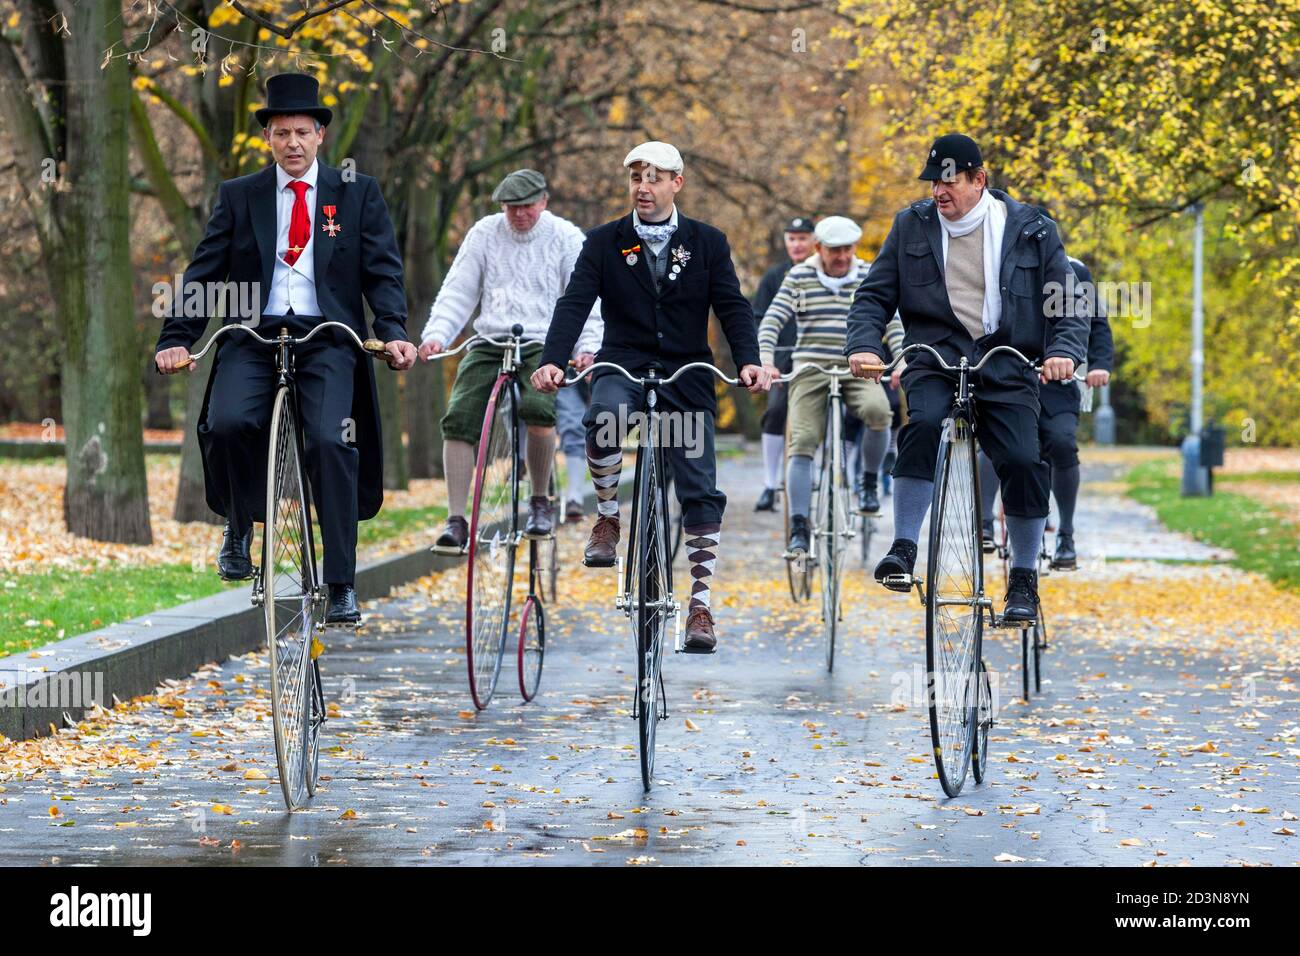 Group of gentlemen on Penny Farthing bicycles high wheels Men group ride in park Stock Photo